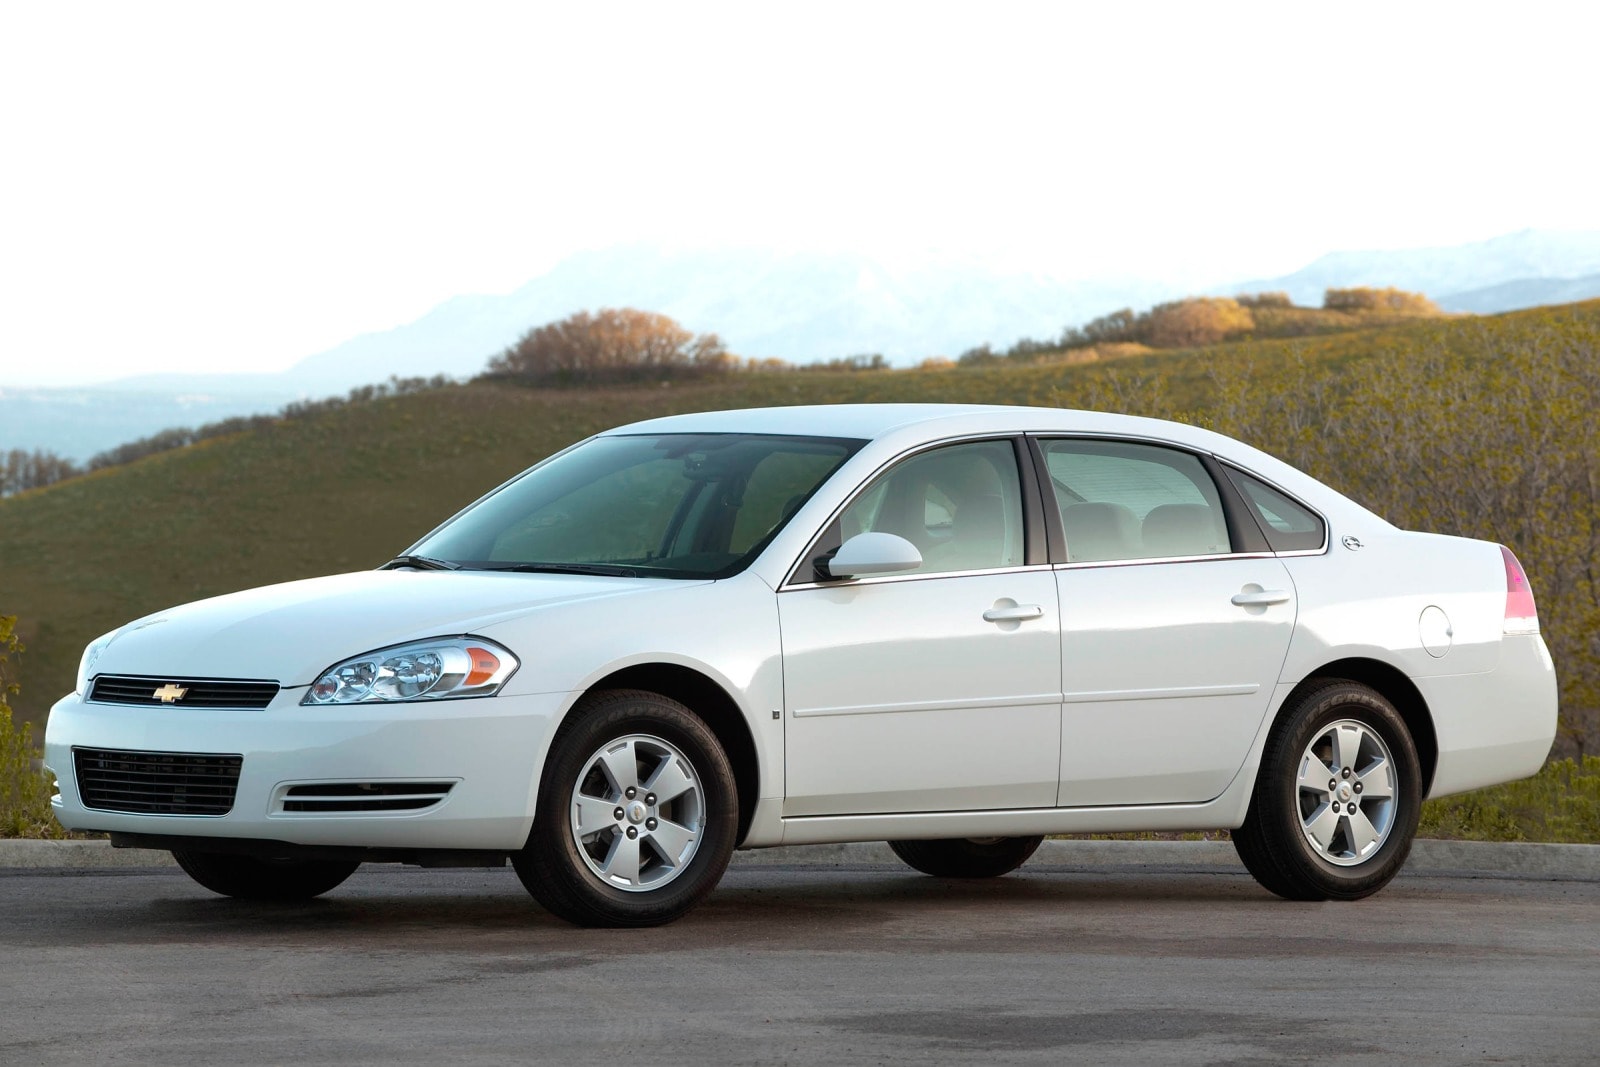 2008 Chevy Impala Review & Ratings | Edmunds